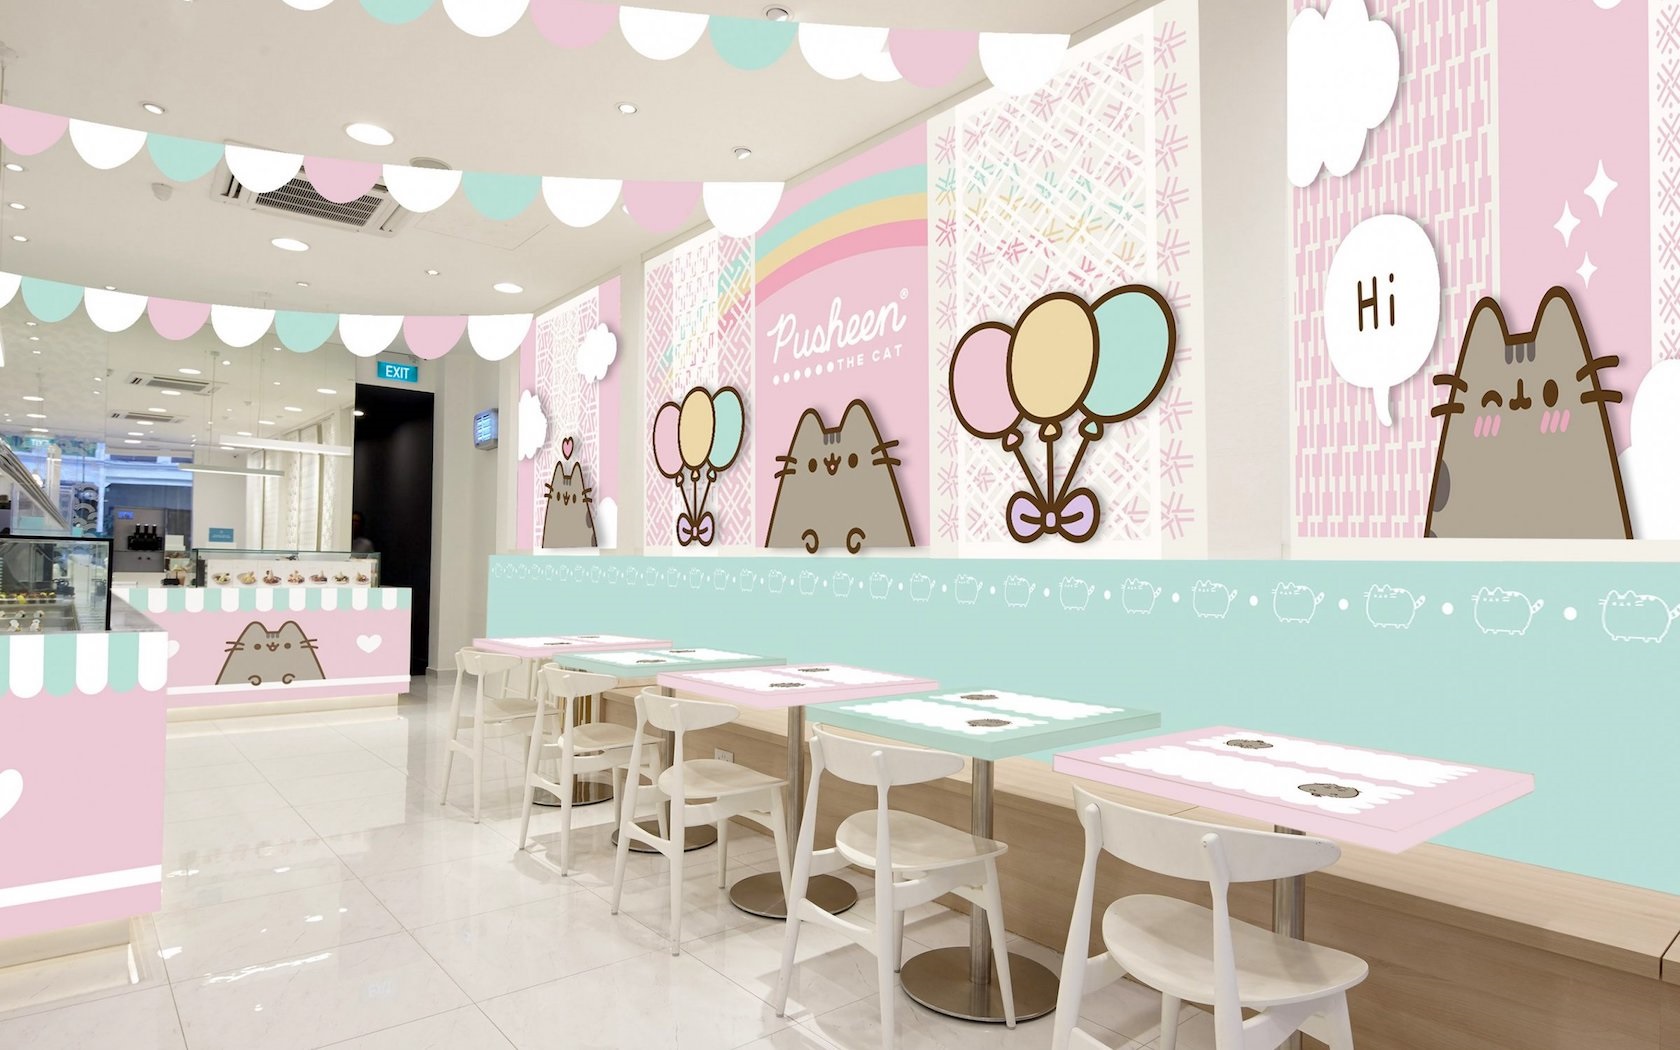 Pusheen is opening a new cafe in Singapore